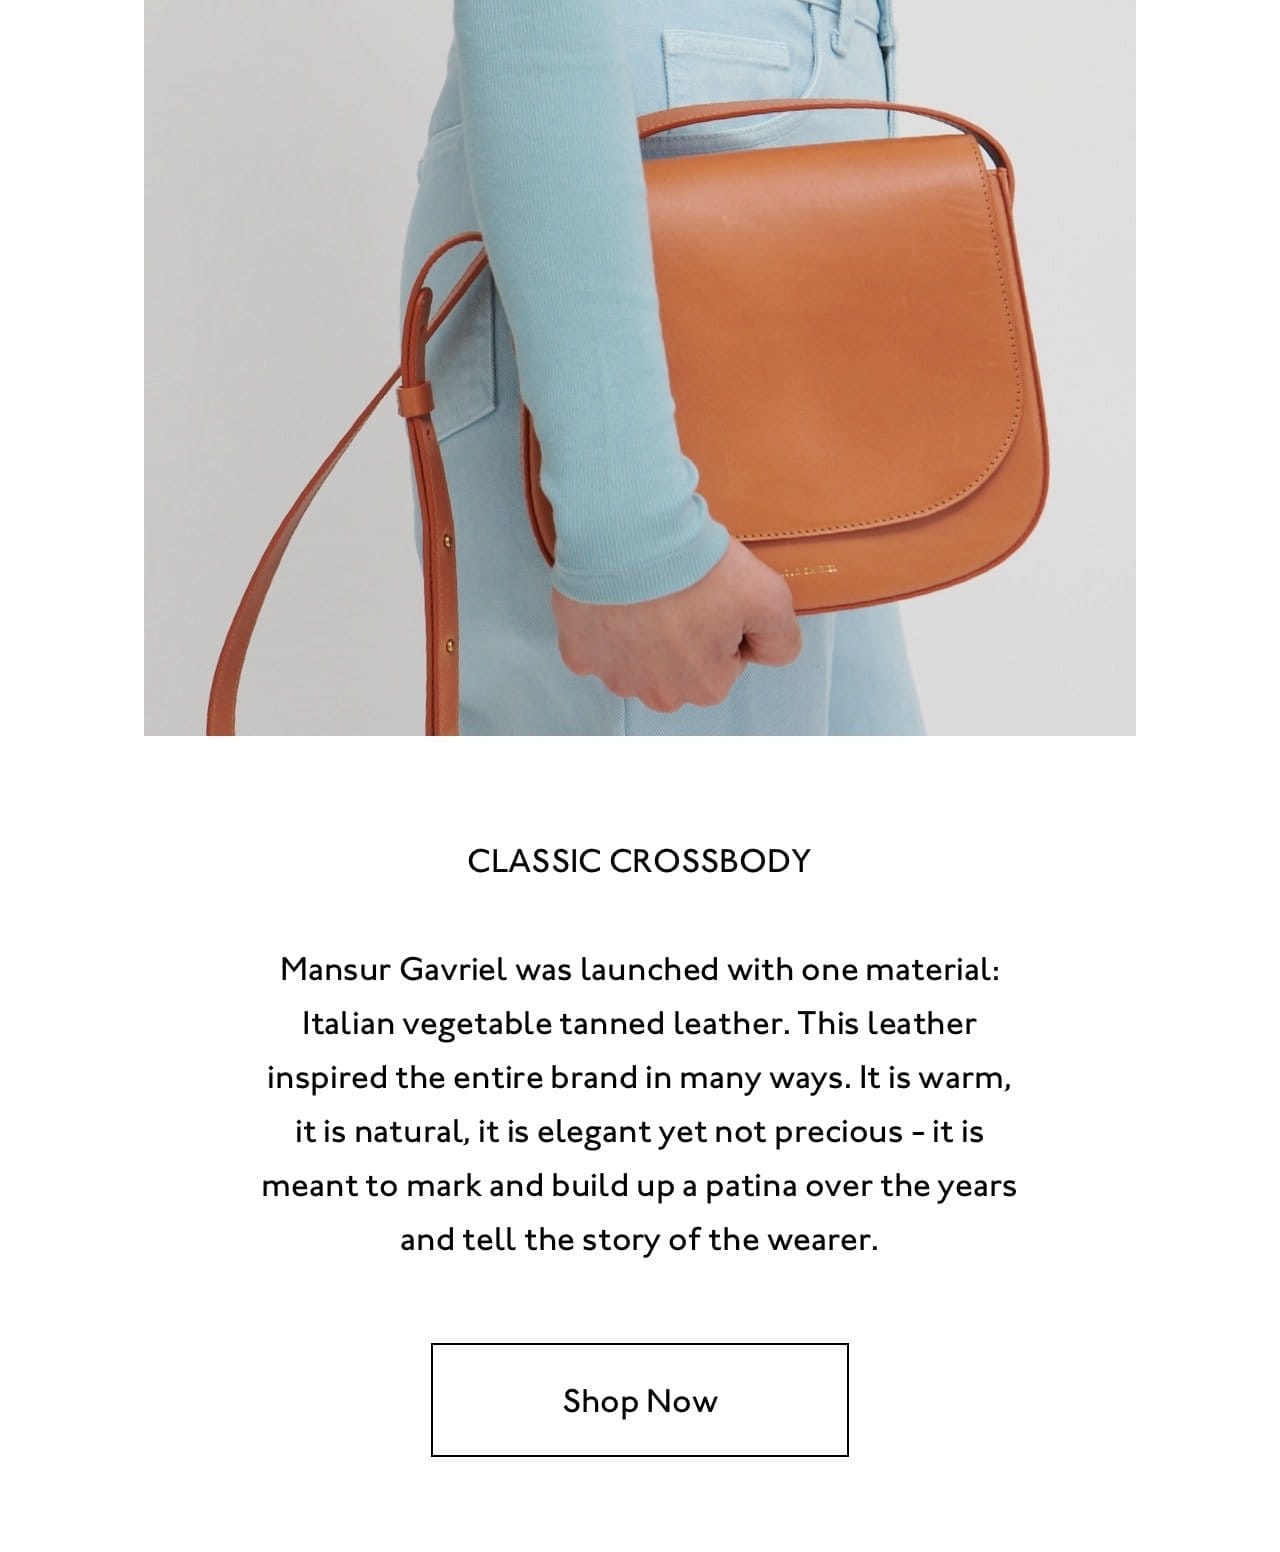 Mansur Gavriel was launched with one material: Italian vegetable tanned leather. This leather inspired the entire brand in many ways. It is warm, it is natural, it is elegant yet not precious - it is meant to mark and build up a patina over the years and tell the story of the wearer.